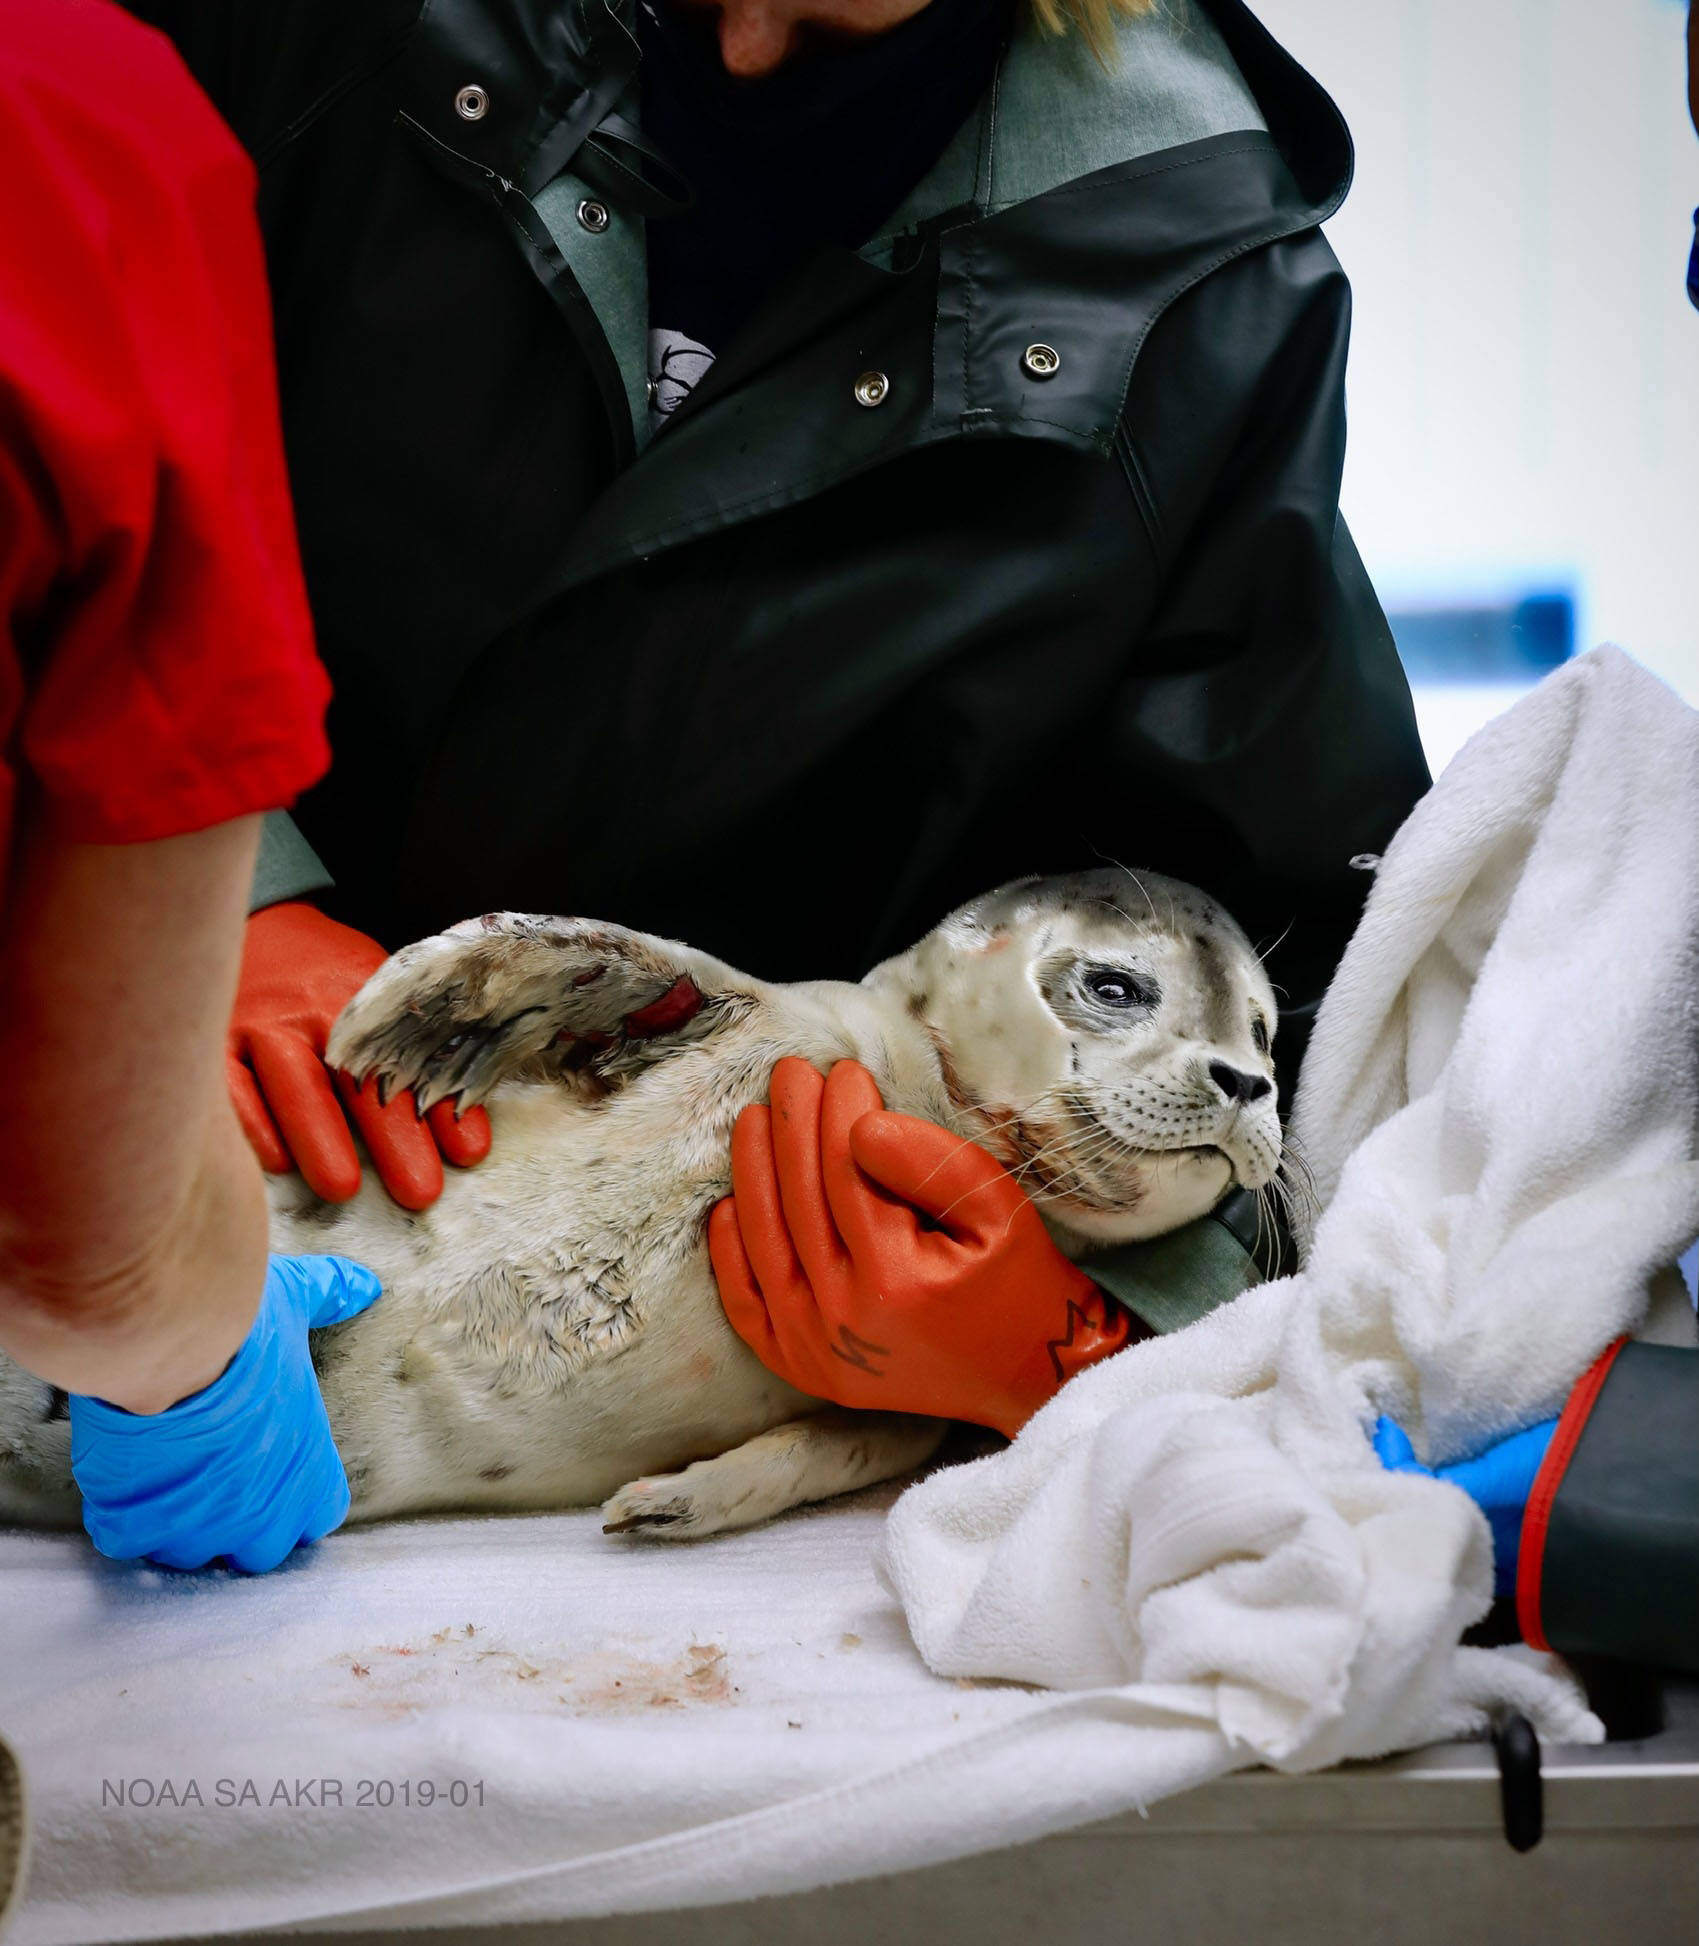 Rescuers assist an injured harbor seal pup on July 4, 2021. The pup was spotted in Resurrection Bay and taken to the Alaska SeaLife Center. (Photo courtesy the Alaska SeaLife Center)